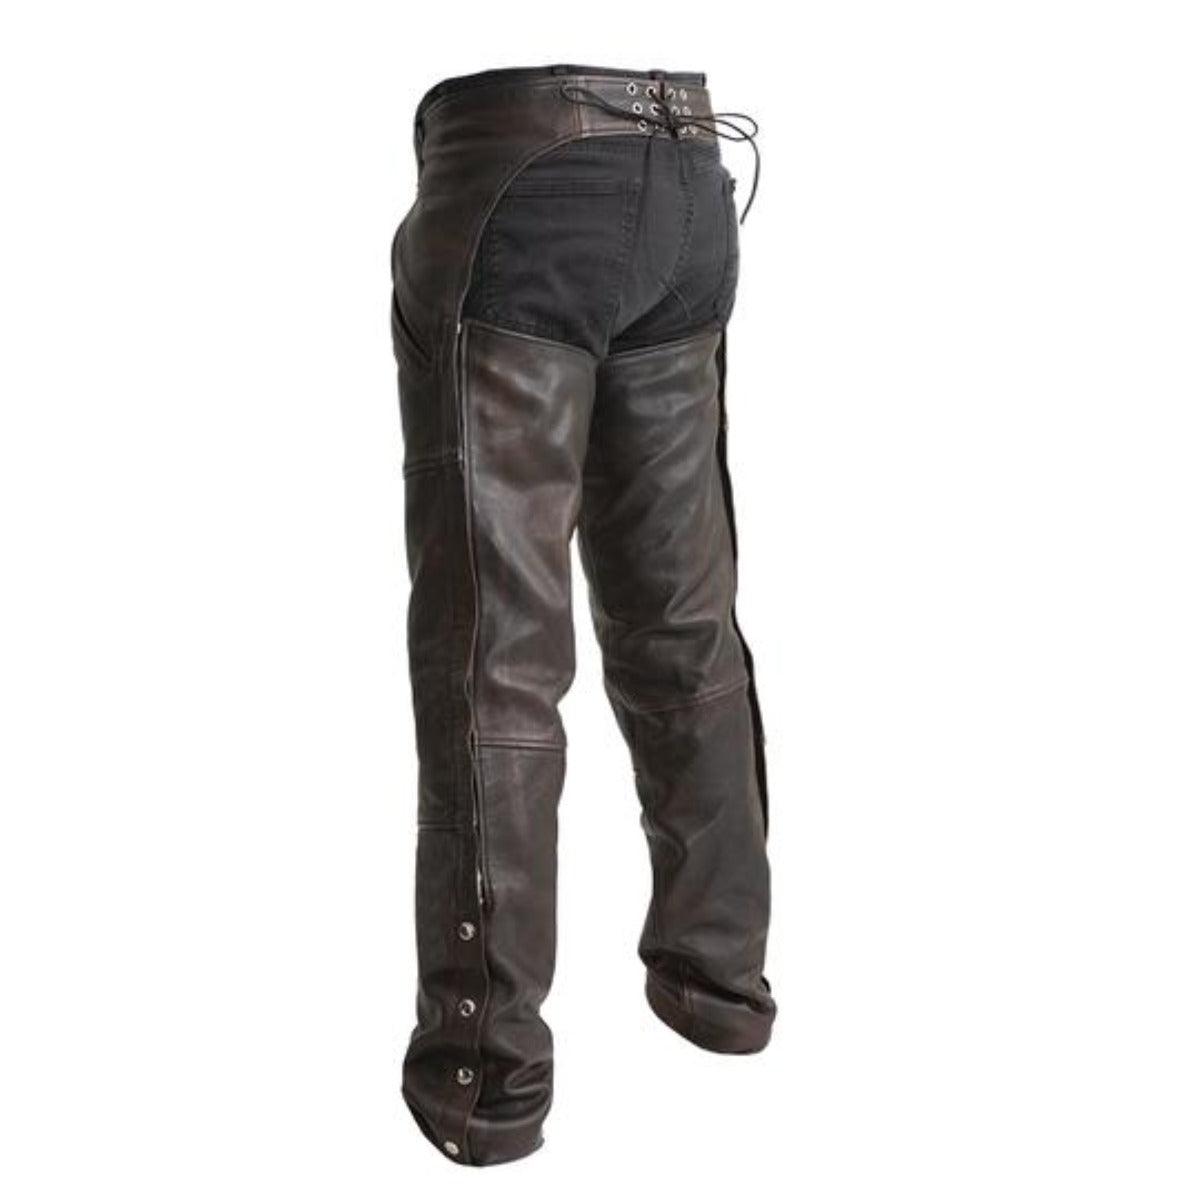 First Manufacturing Rover - Unisex Motorcycle Leather Chaps - American Legend Rider